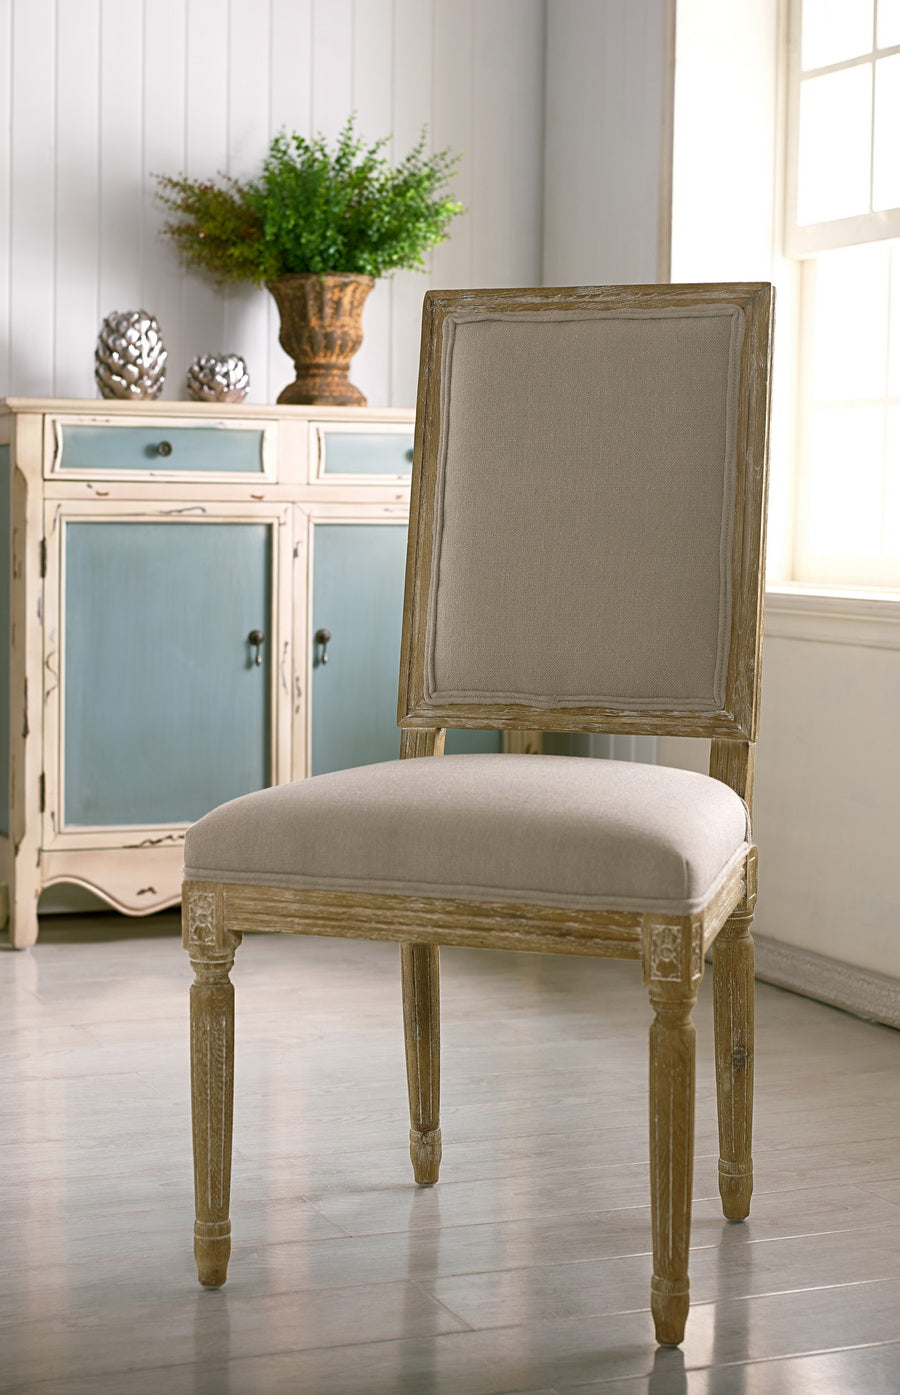 French Wood Trimmed Living Room Accent Chair in Beige Linen Fabric bxi6012-110